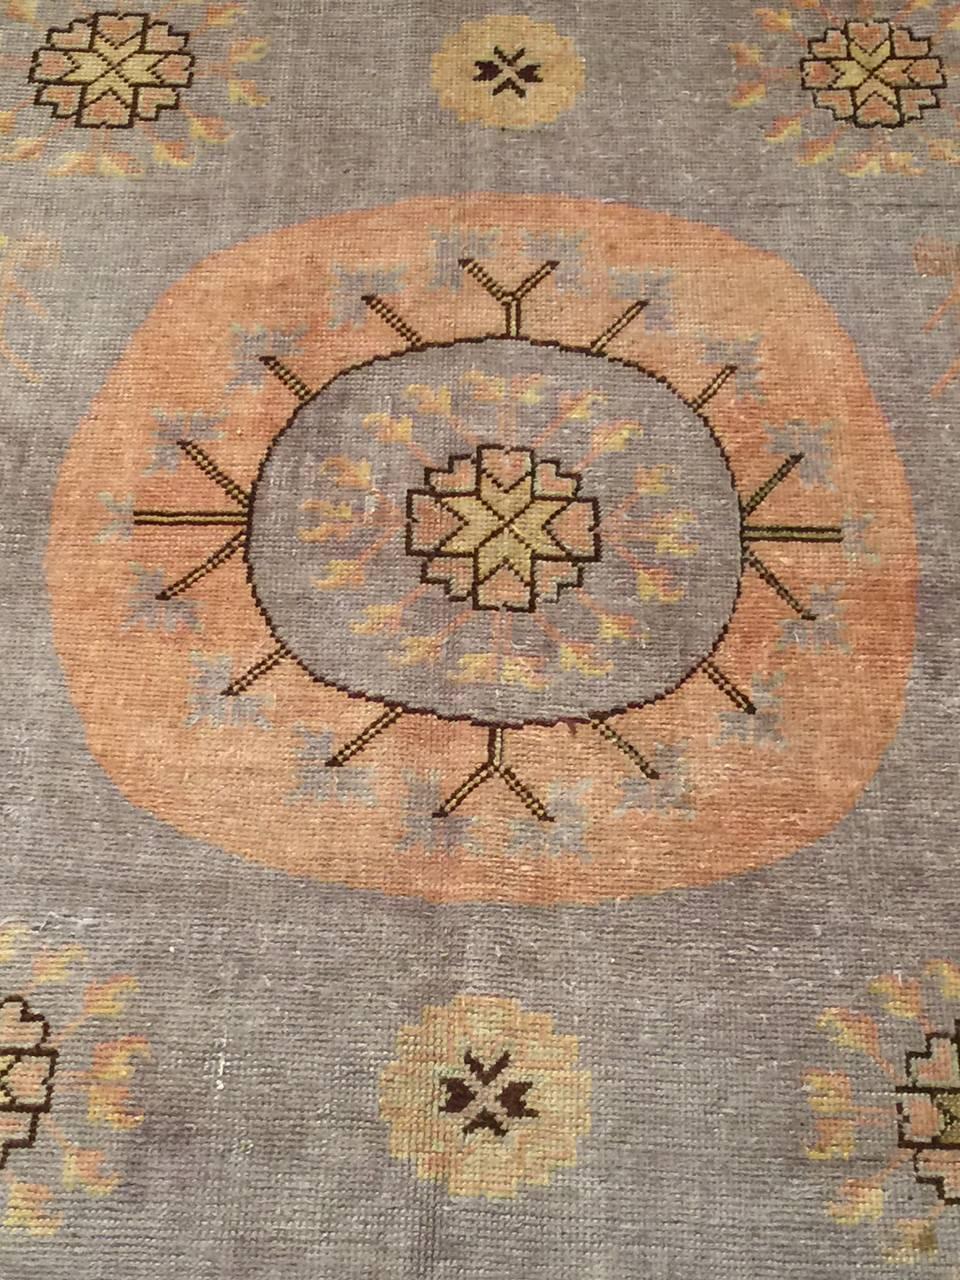 Vintage Khotan Samarkand rug, circa 1920. The decorative rugs are great accent pieces, using a great balance of geometric and floral motifs. The size and shape makes is ideal for entry ways. The condition is excellent. Colors: Lilac and peach. Size: